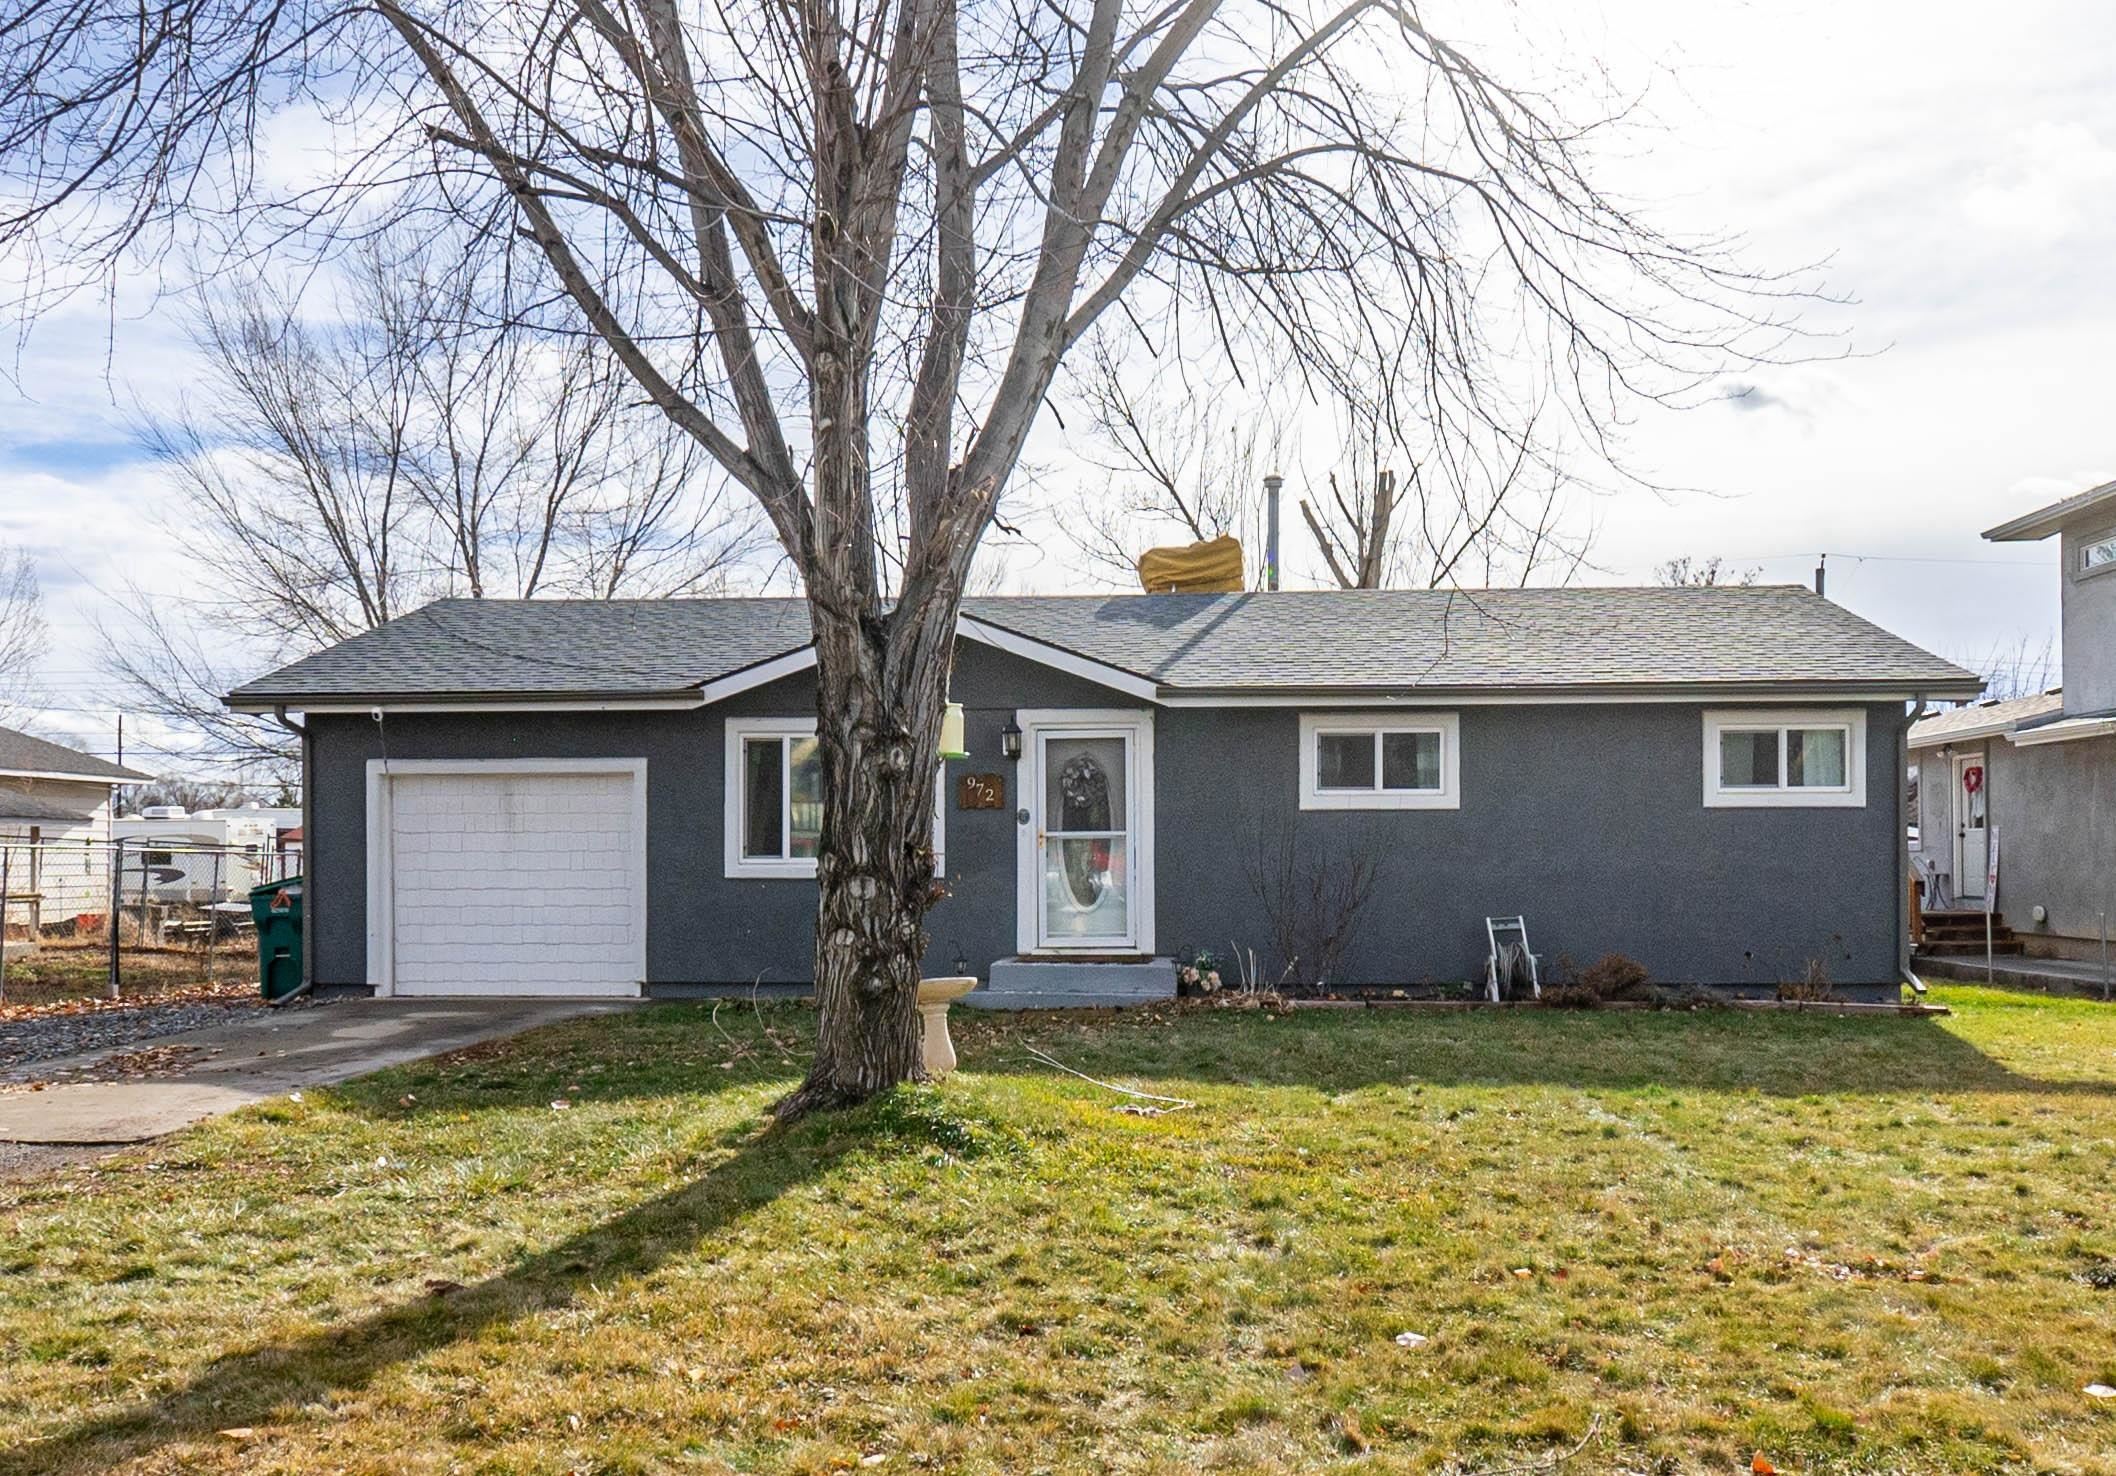 The home you've been looking for in Fruita, Colorado! No HOA, close to shopping, dining, festivals, and events. This home has a newer cooler, 2016 furnace, 2017 hot water heater and a new roof in 2021. Features include; original hardwood floors, built-in cabinetry, a nice size yard with mature trees, a timed sprinkler system and RV parking